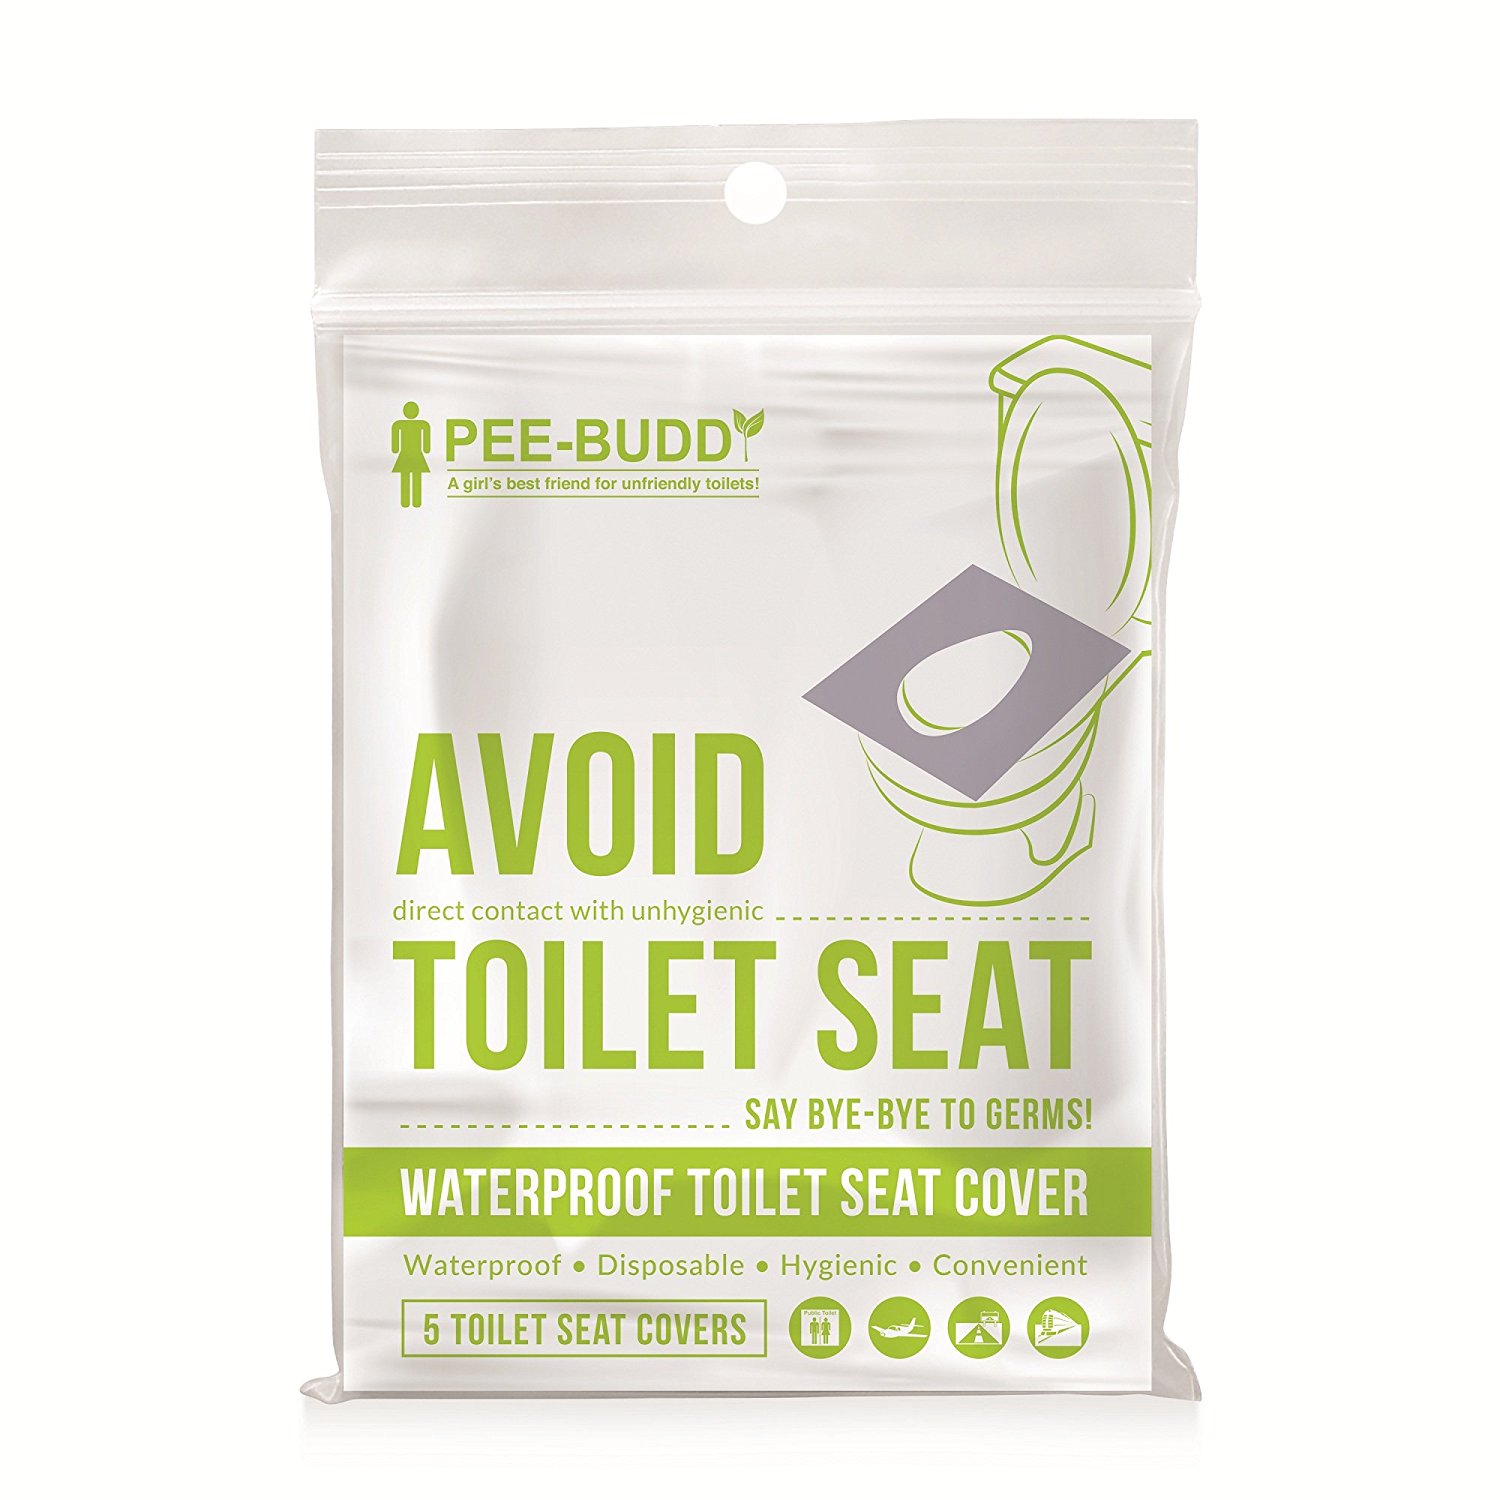 MosQuick® Waterproof toilet seat covers, ,easy to use ,Travel Pack That  Fits Over Standard Toilet Seat To Protect From Germs, Bacteria & Skin